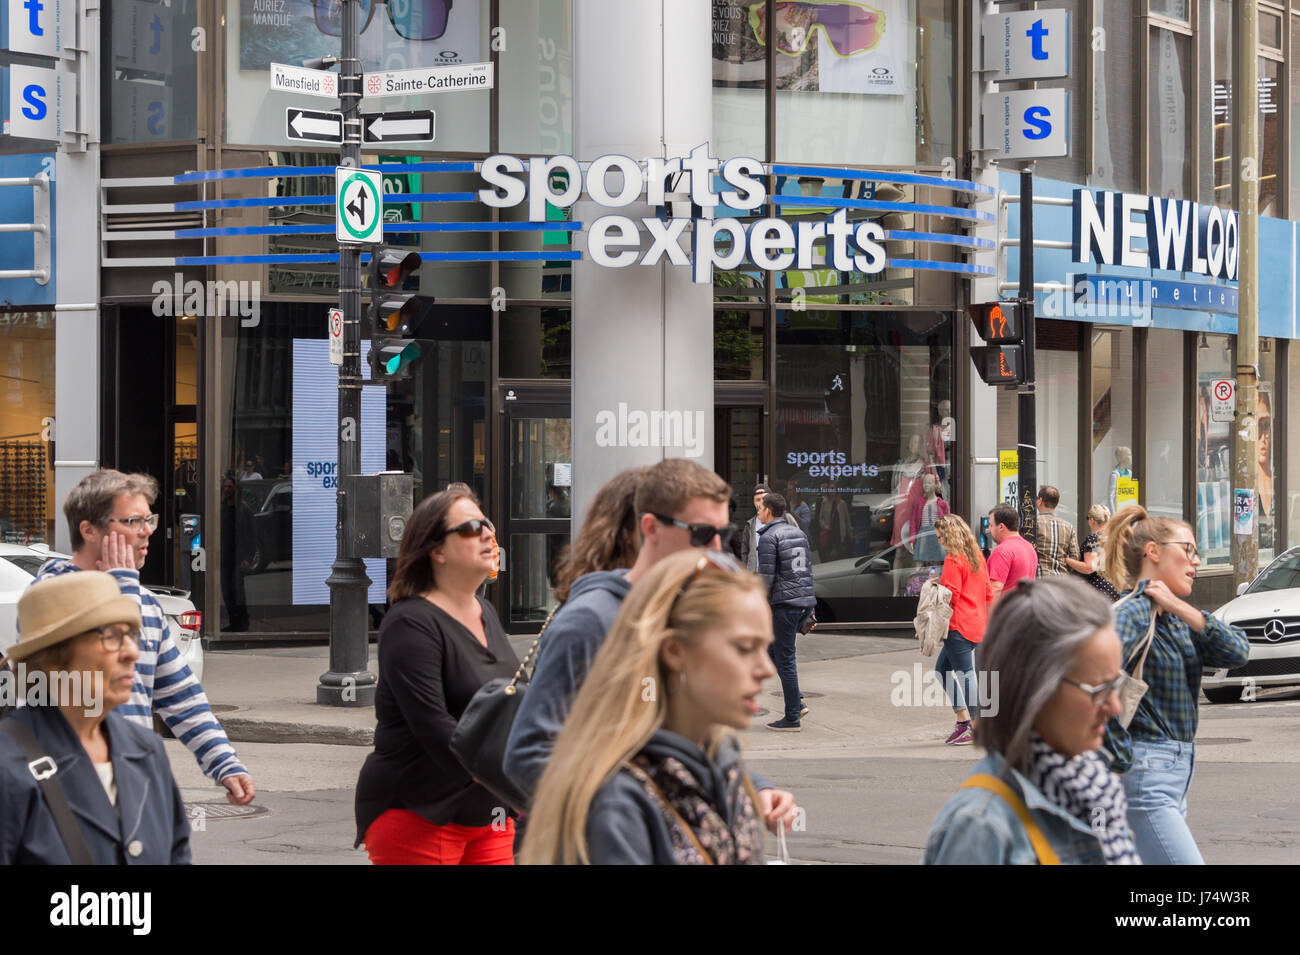 Montreal, CA - 21 May 2017: Sports Experts is a sport store on Sainte-Catherine street Stock Photo